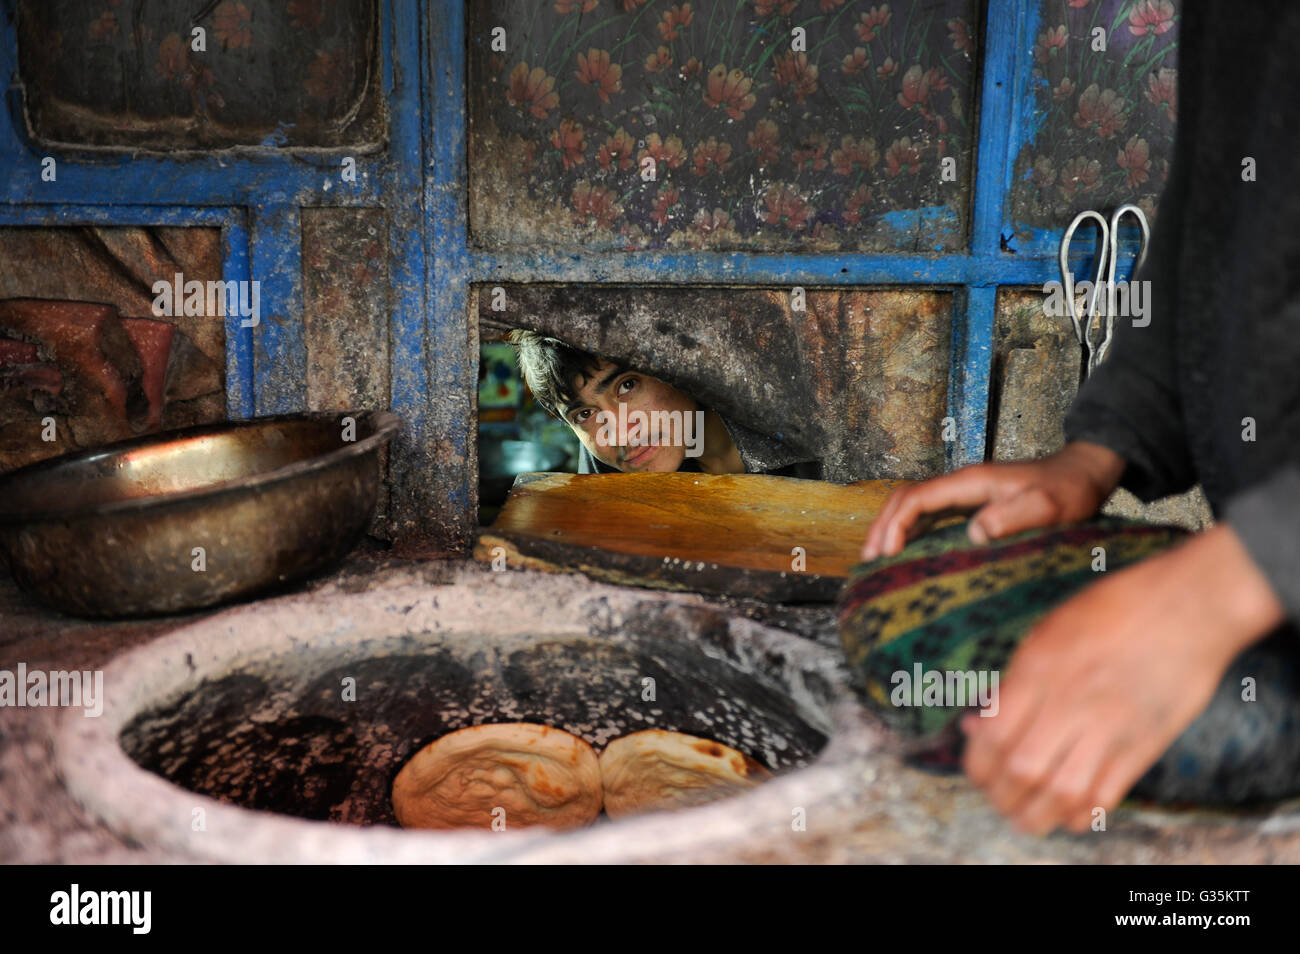 CHINA province Xinjiang, city Kashgar where uyghur people are living, bakery, clay oven, baking bagel and nang flatbread Stock Photo